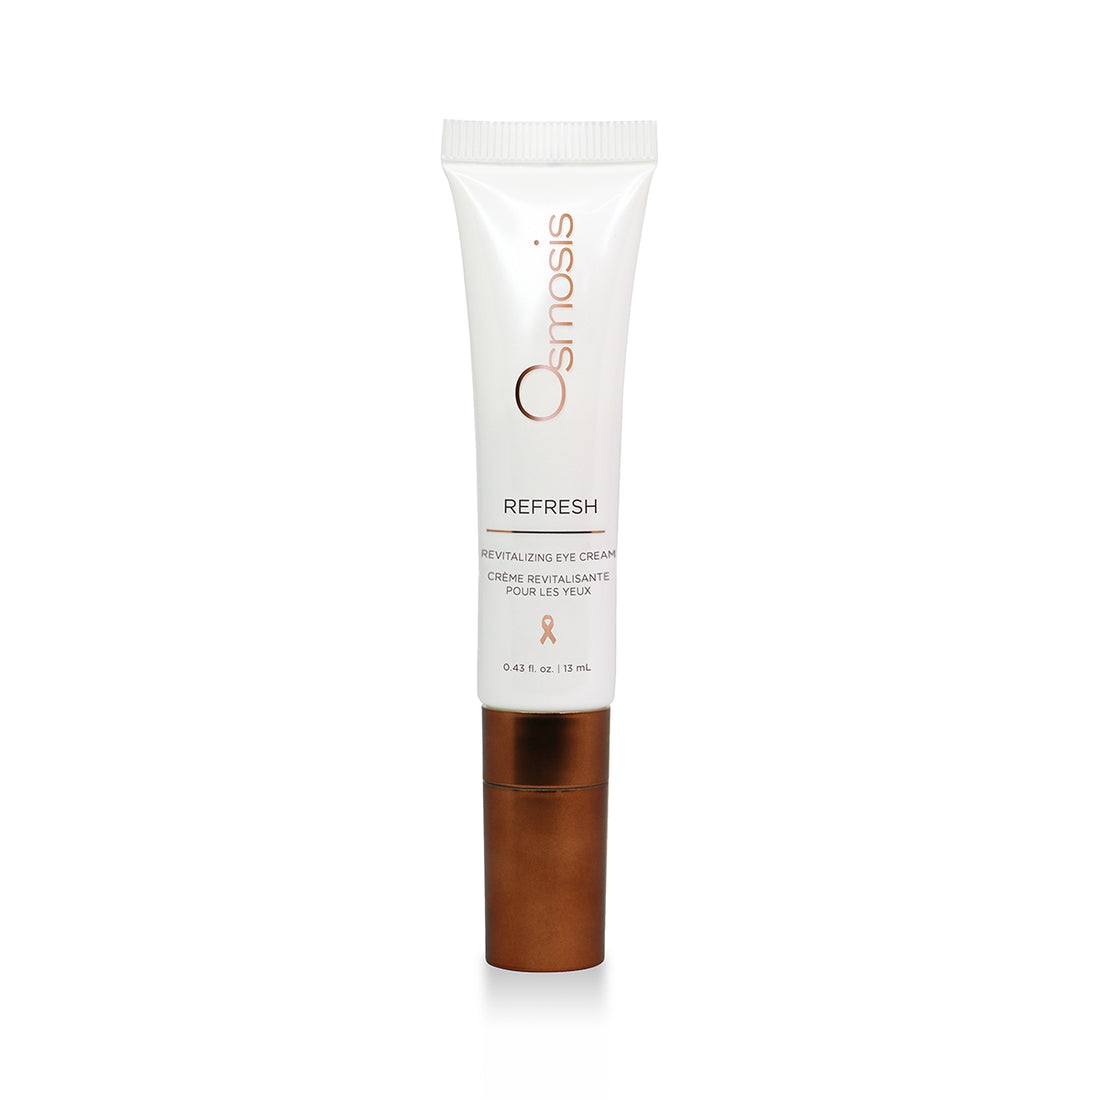 Osmosis Skincare Refresh Revitalizing Eye Cream diminishes fine lines, wrinkles, dark circles and puffiness.